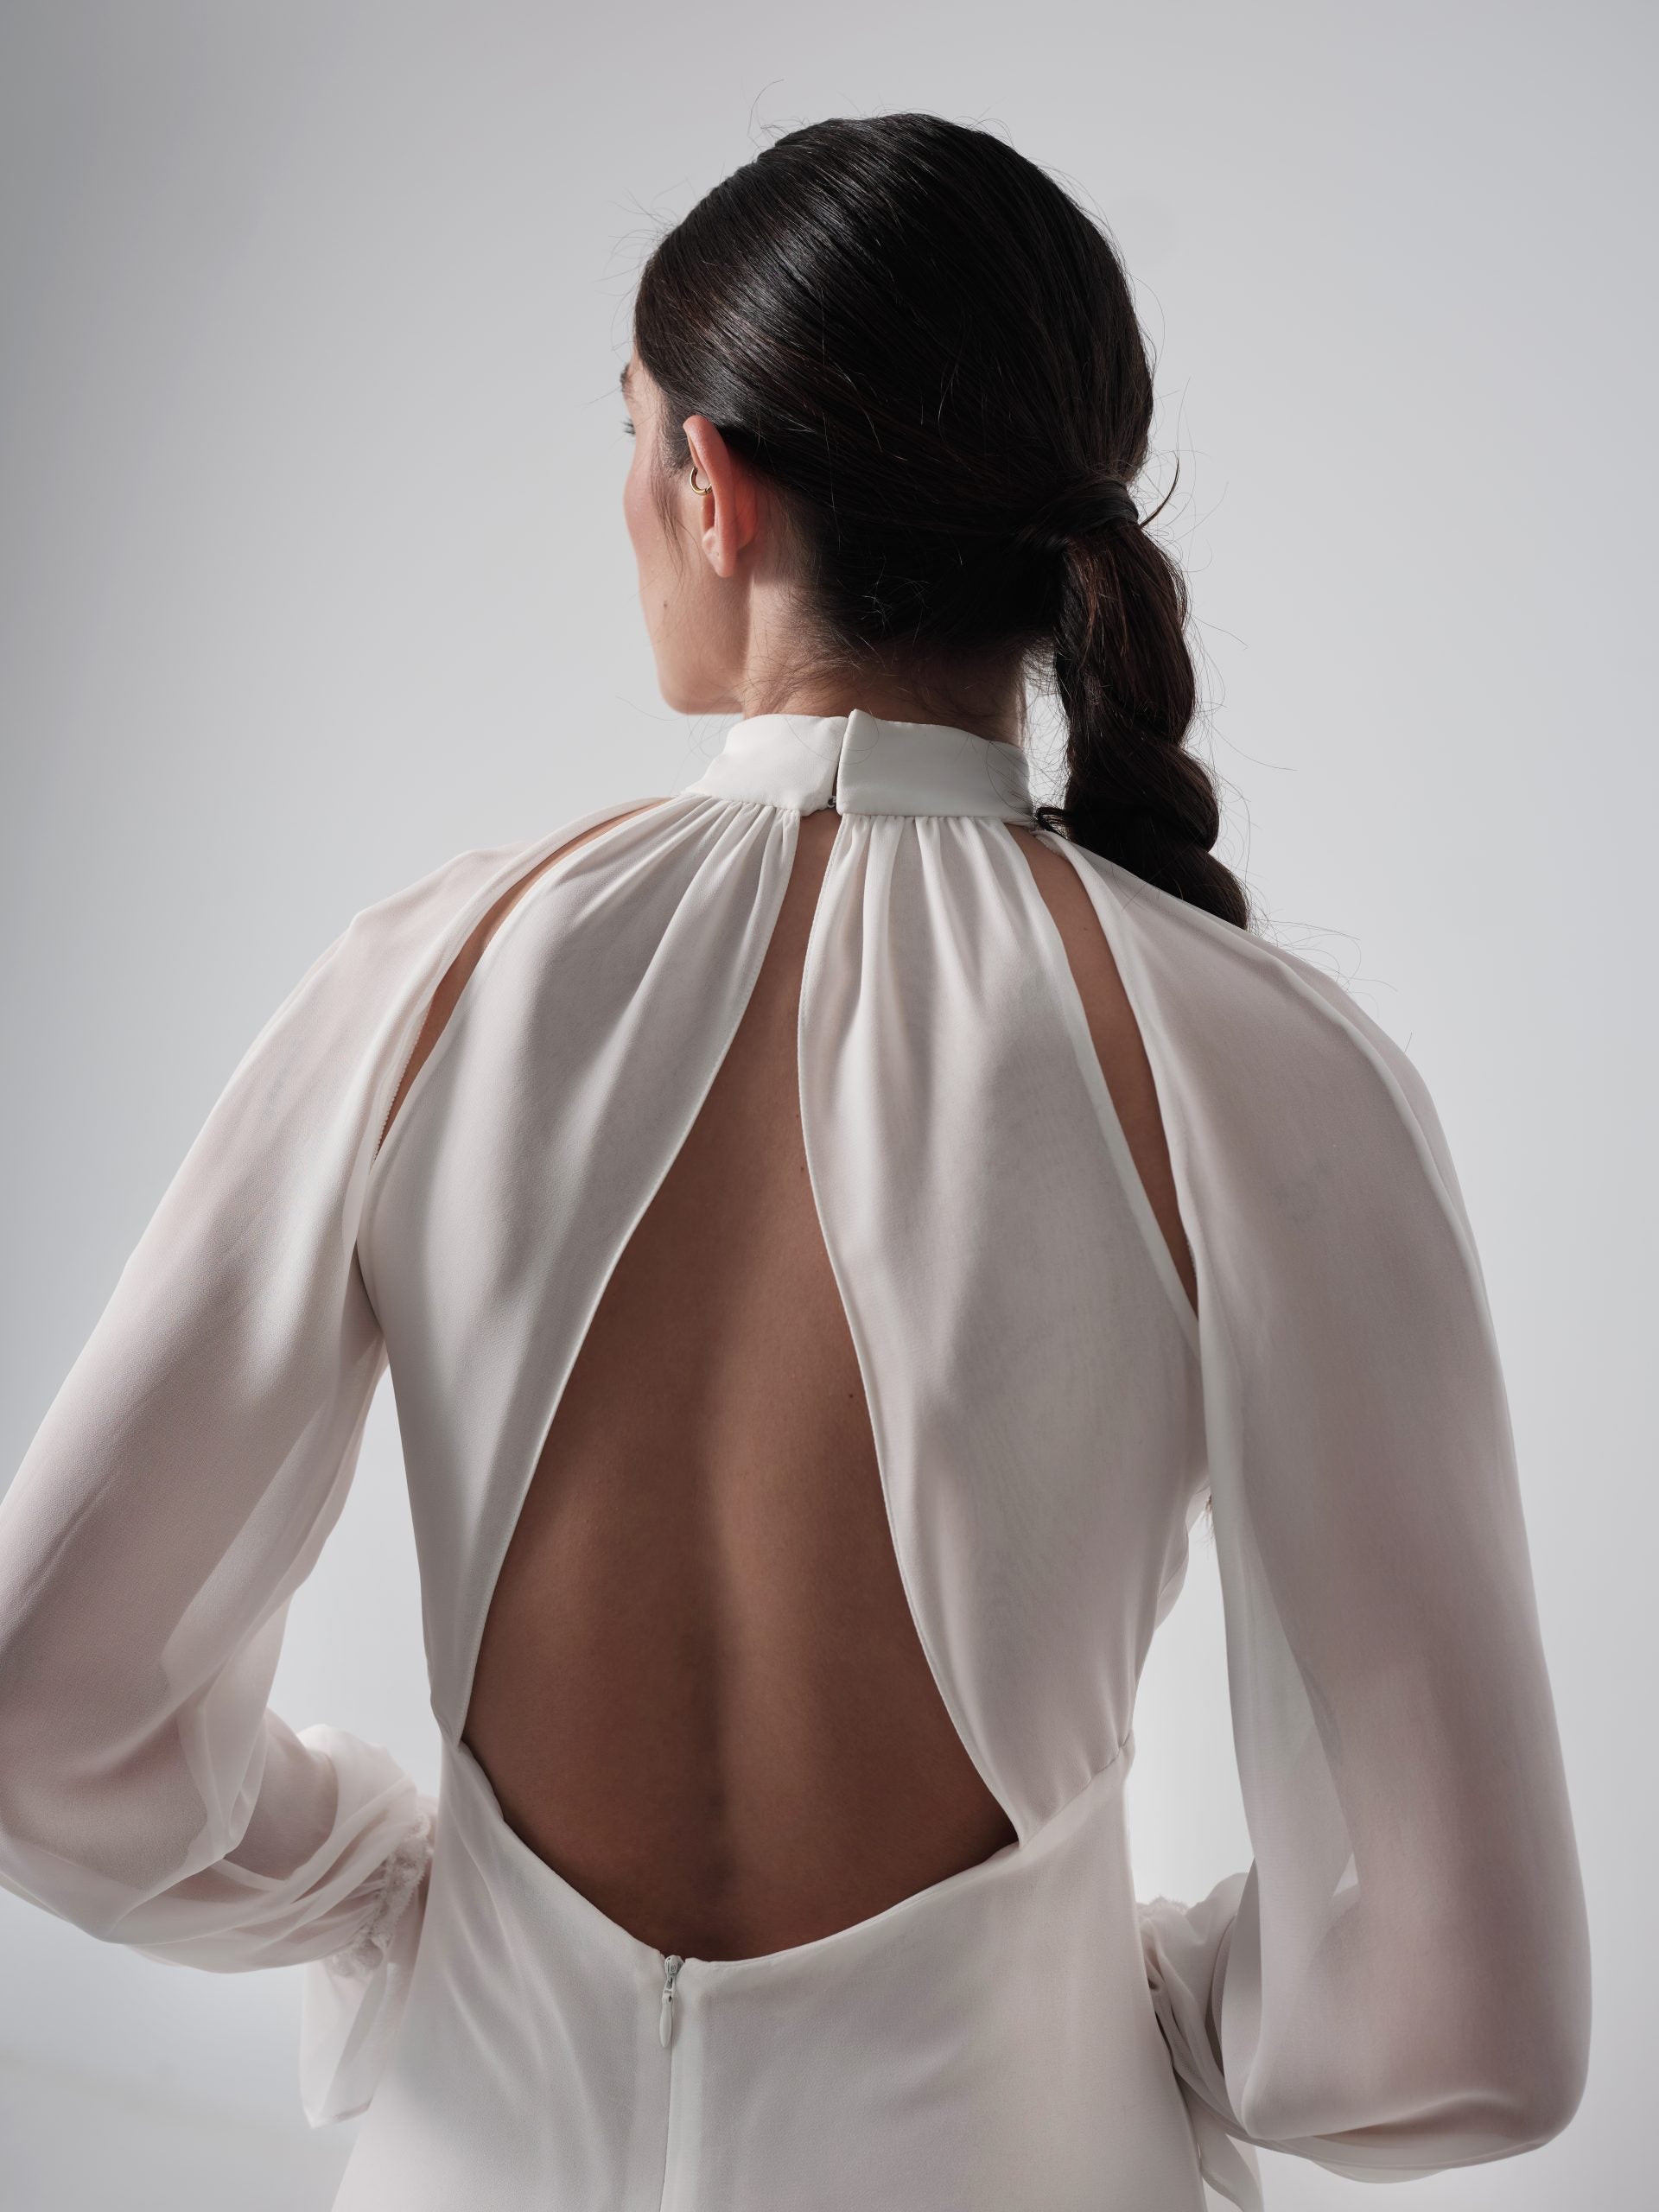 Simple Pleated Halter-Neck Sheath Gown with Detachable Sleeves by Marta Martí - Image 2